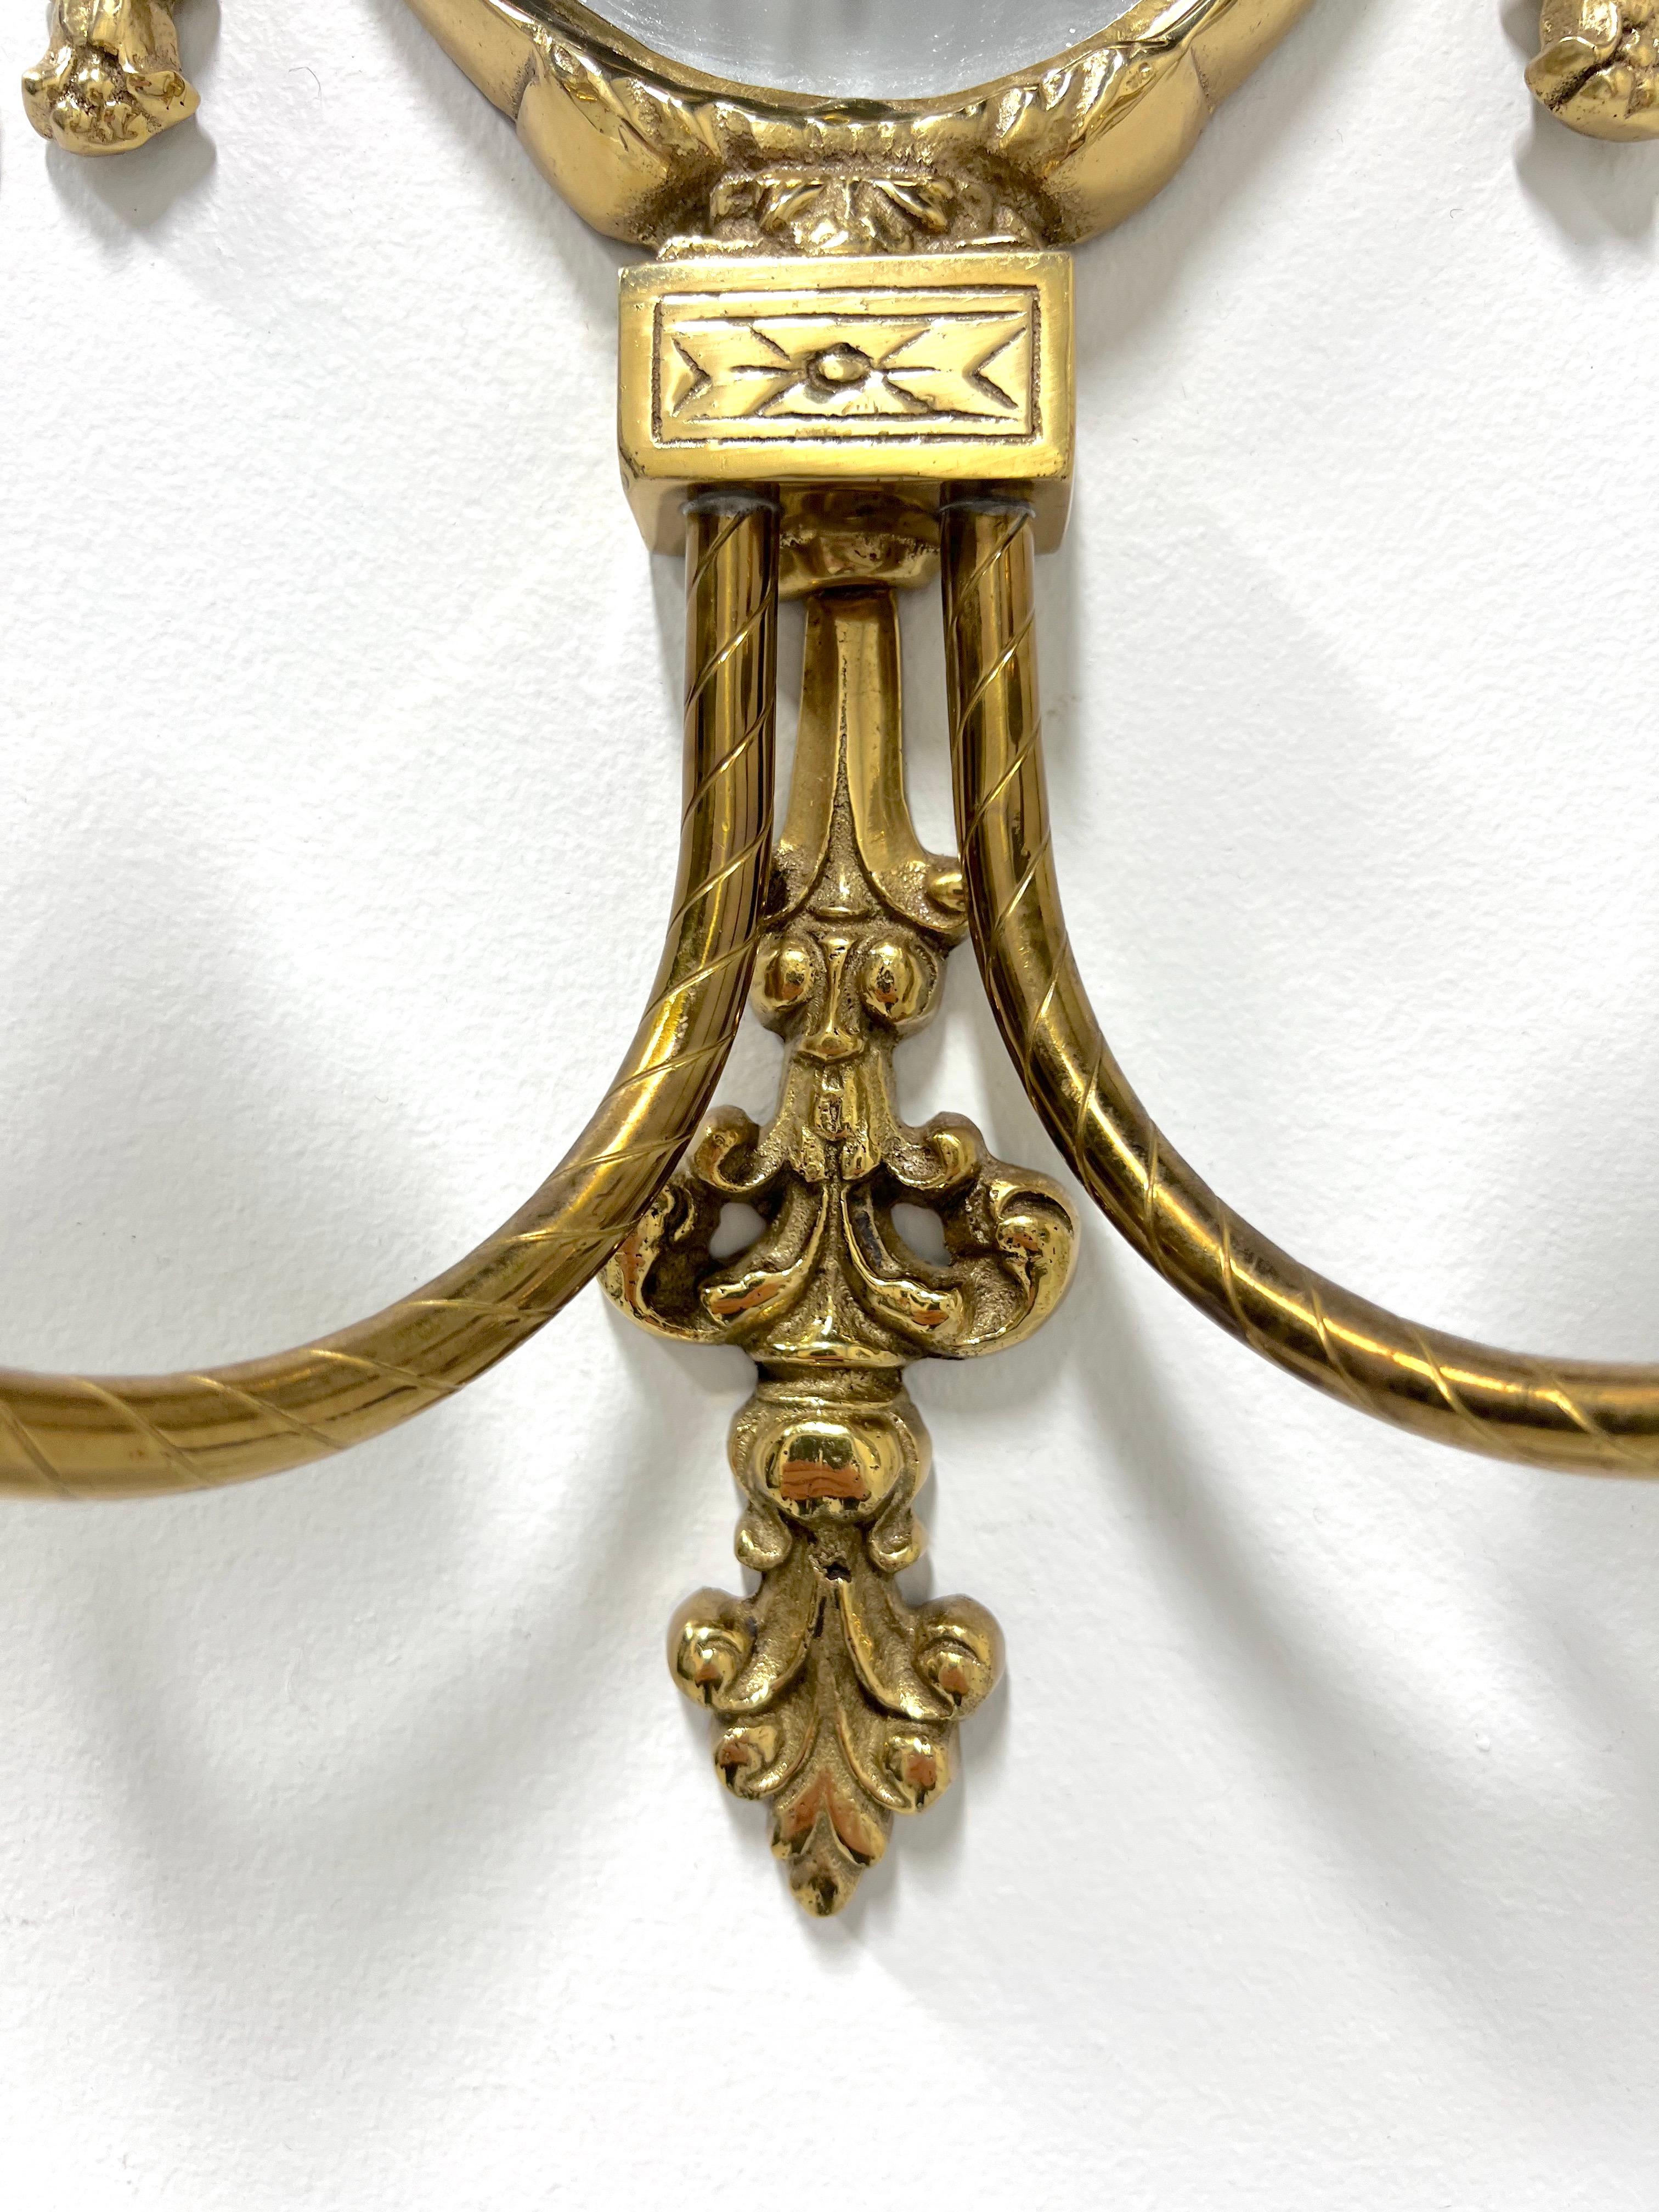 GLO-MAR ARTWORKS Mid 20th Century Brass French Provincial Candle Sconces - Pair For Sale 3